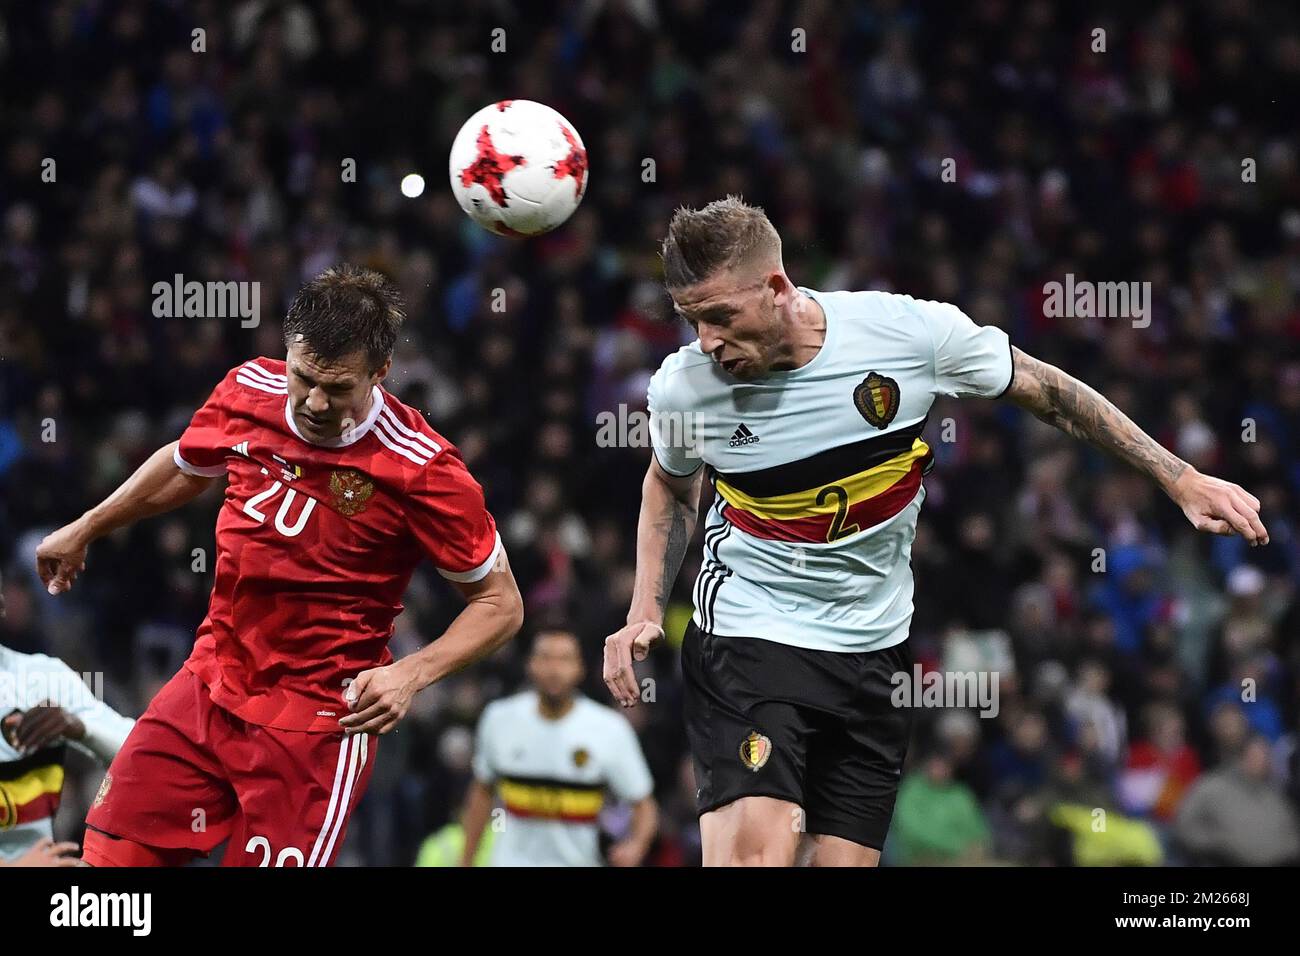 Russia's Maksim Kanunnikov and Belgium's Toby Alderweireld pictured in action during a friendly game between Belgium's Red Devils and Russia, on Tuesday 28 March 2017, in Adler, Russia. BELGA PHOTO DIRK WAEM Stock Photo